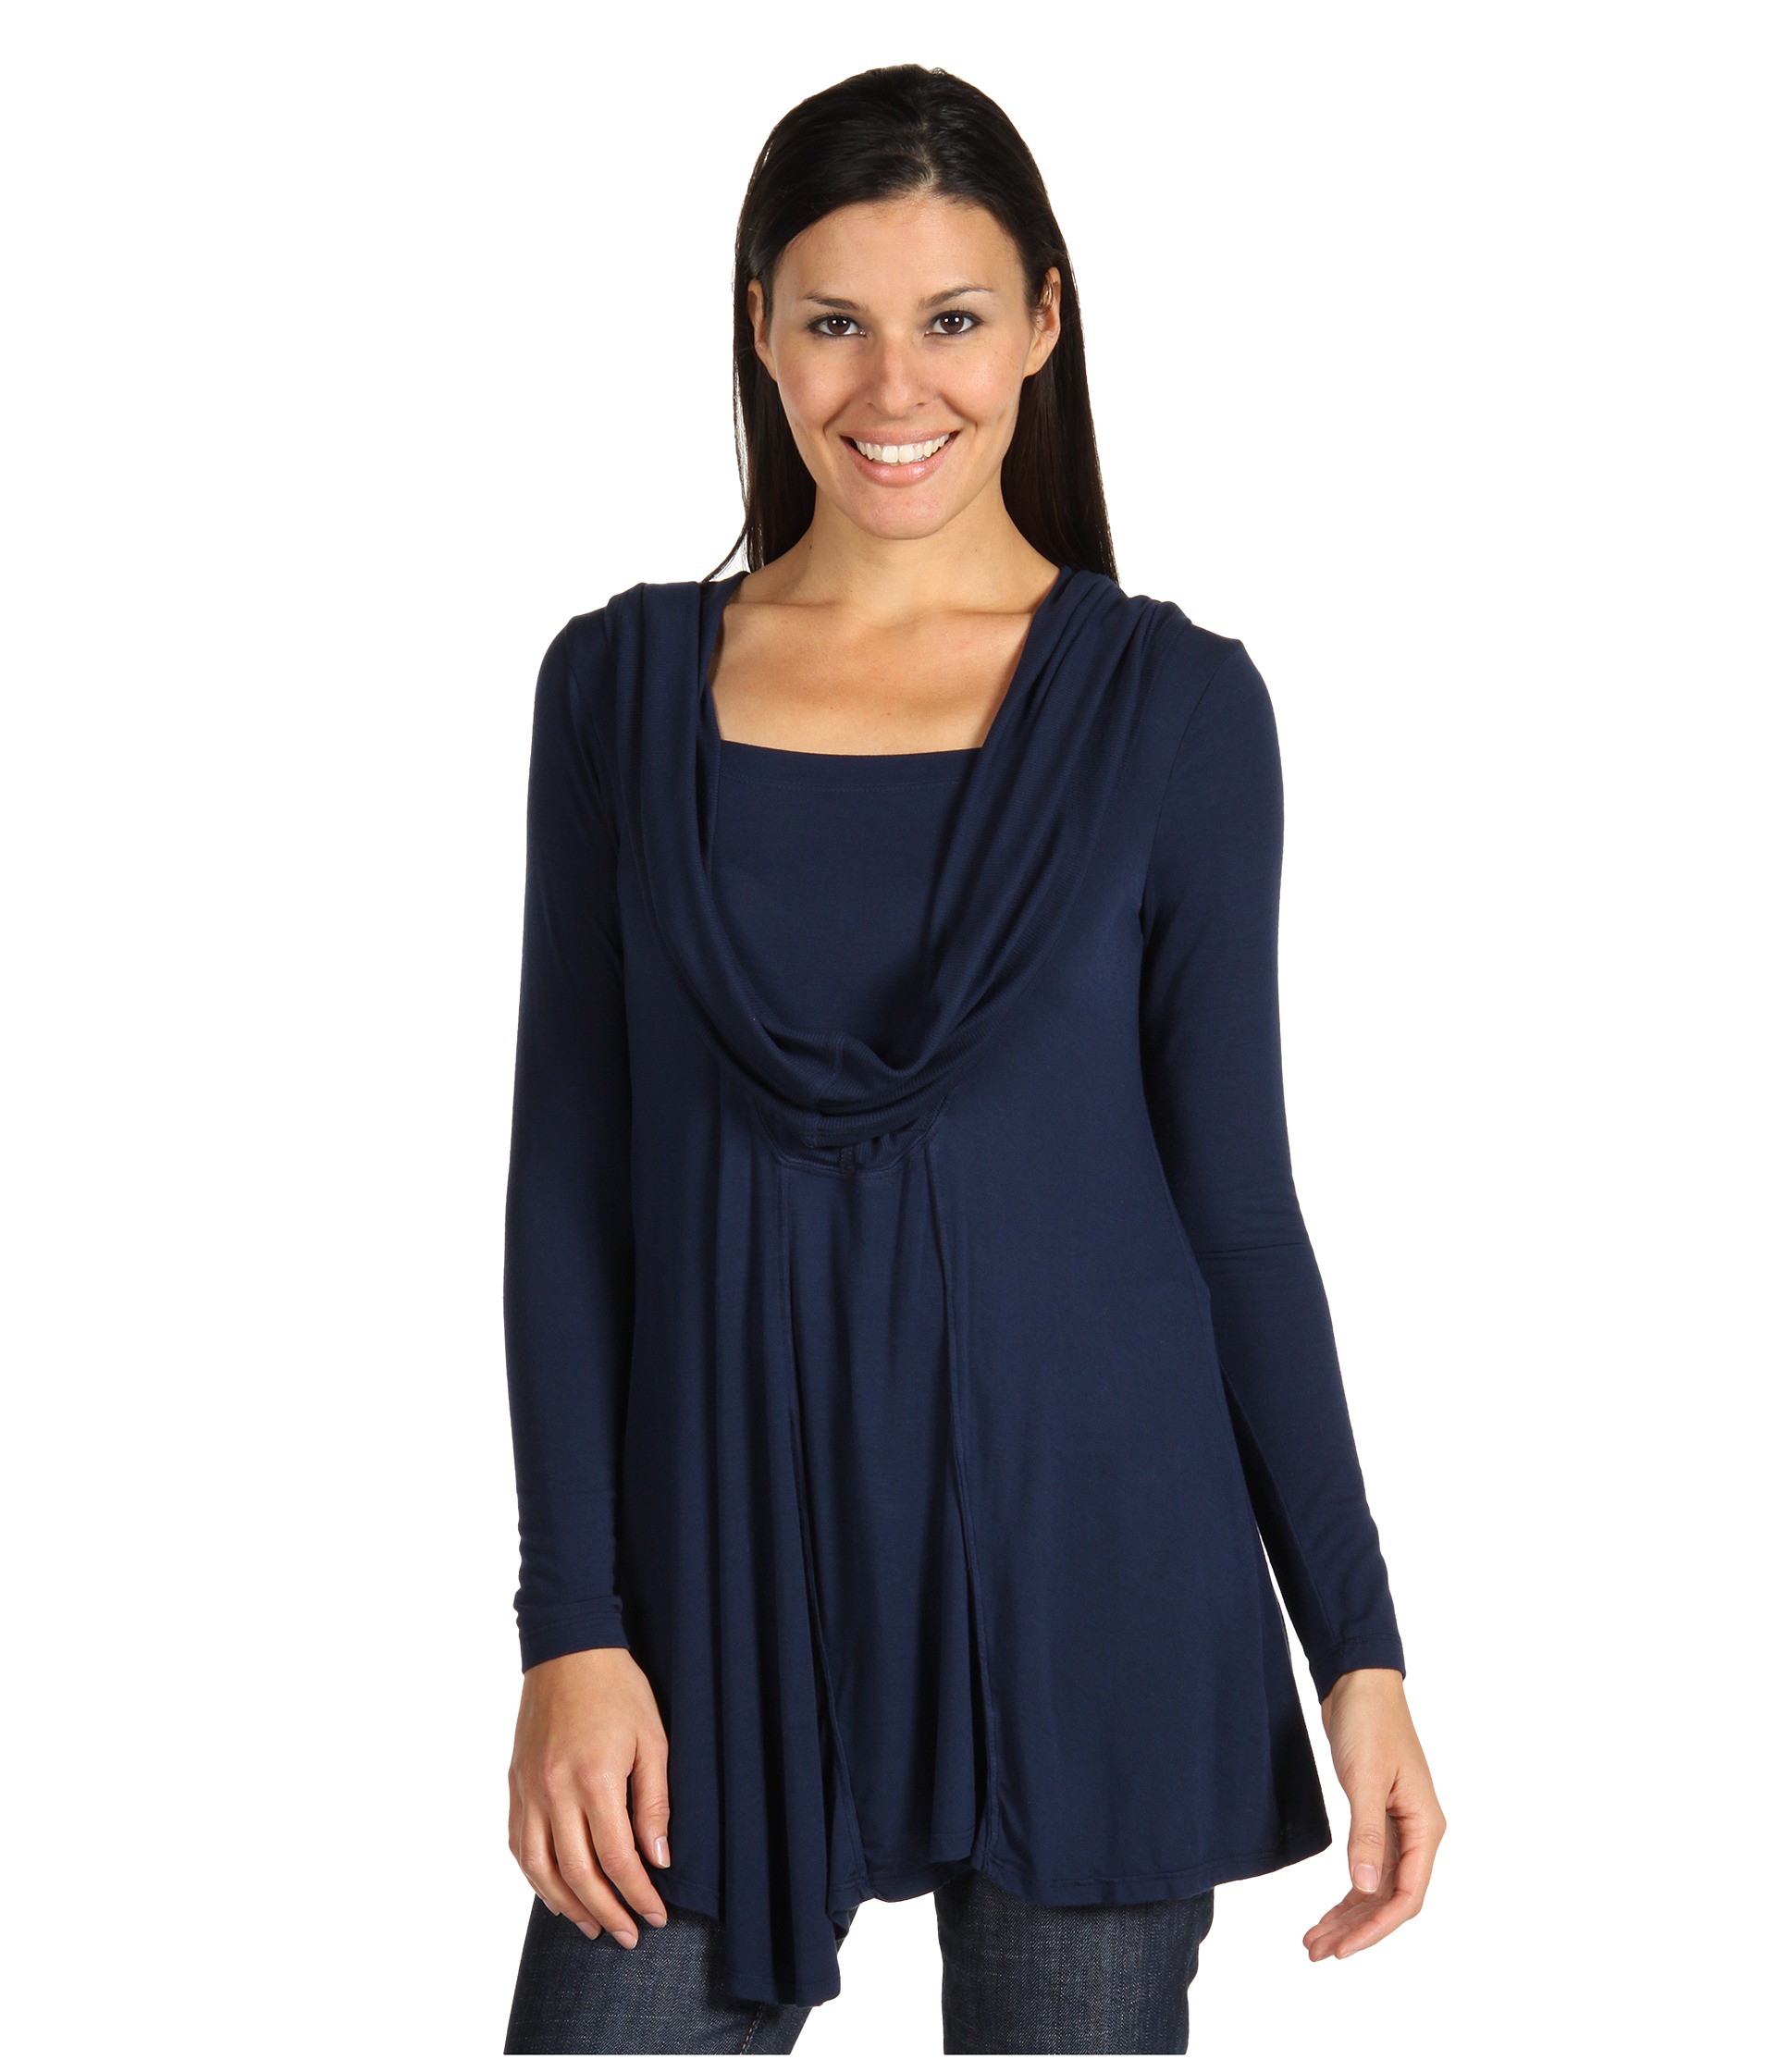 Green Dragon Cowl Pullover Tunic $56.99 ( 45% off MSRP $103.00)